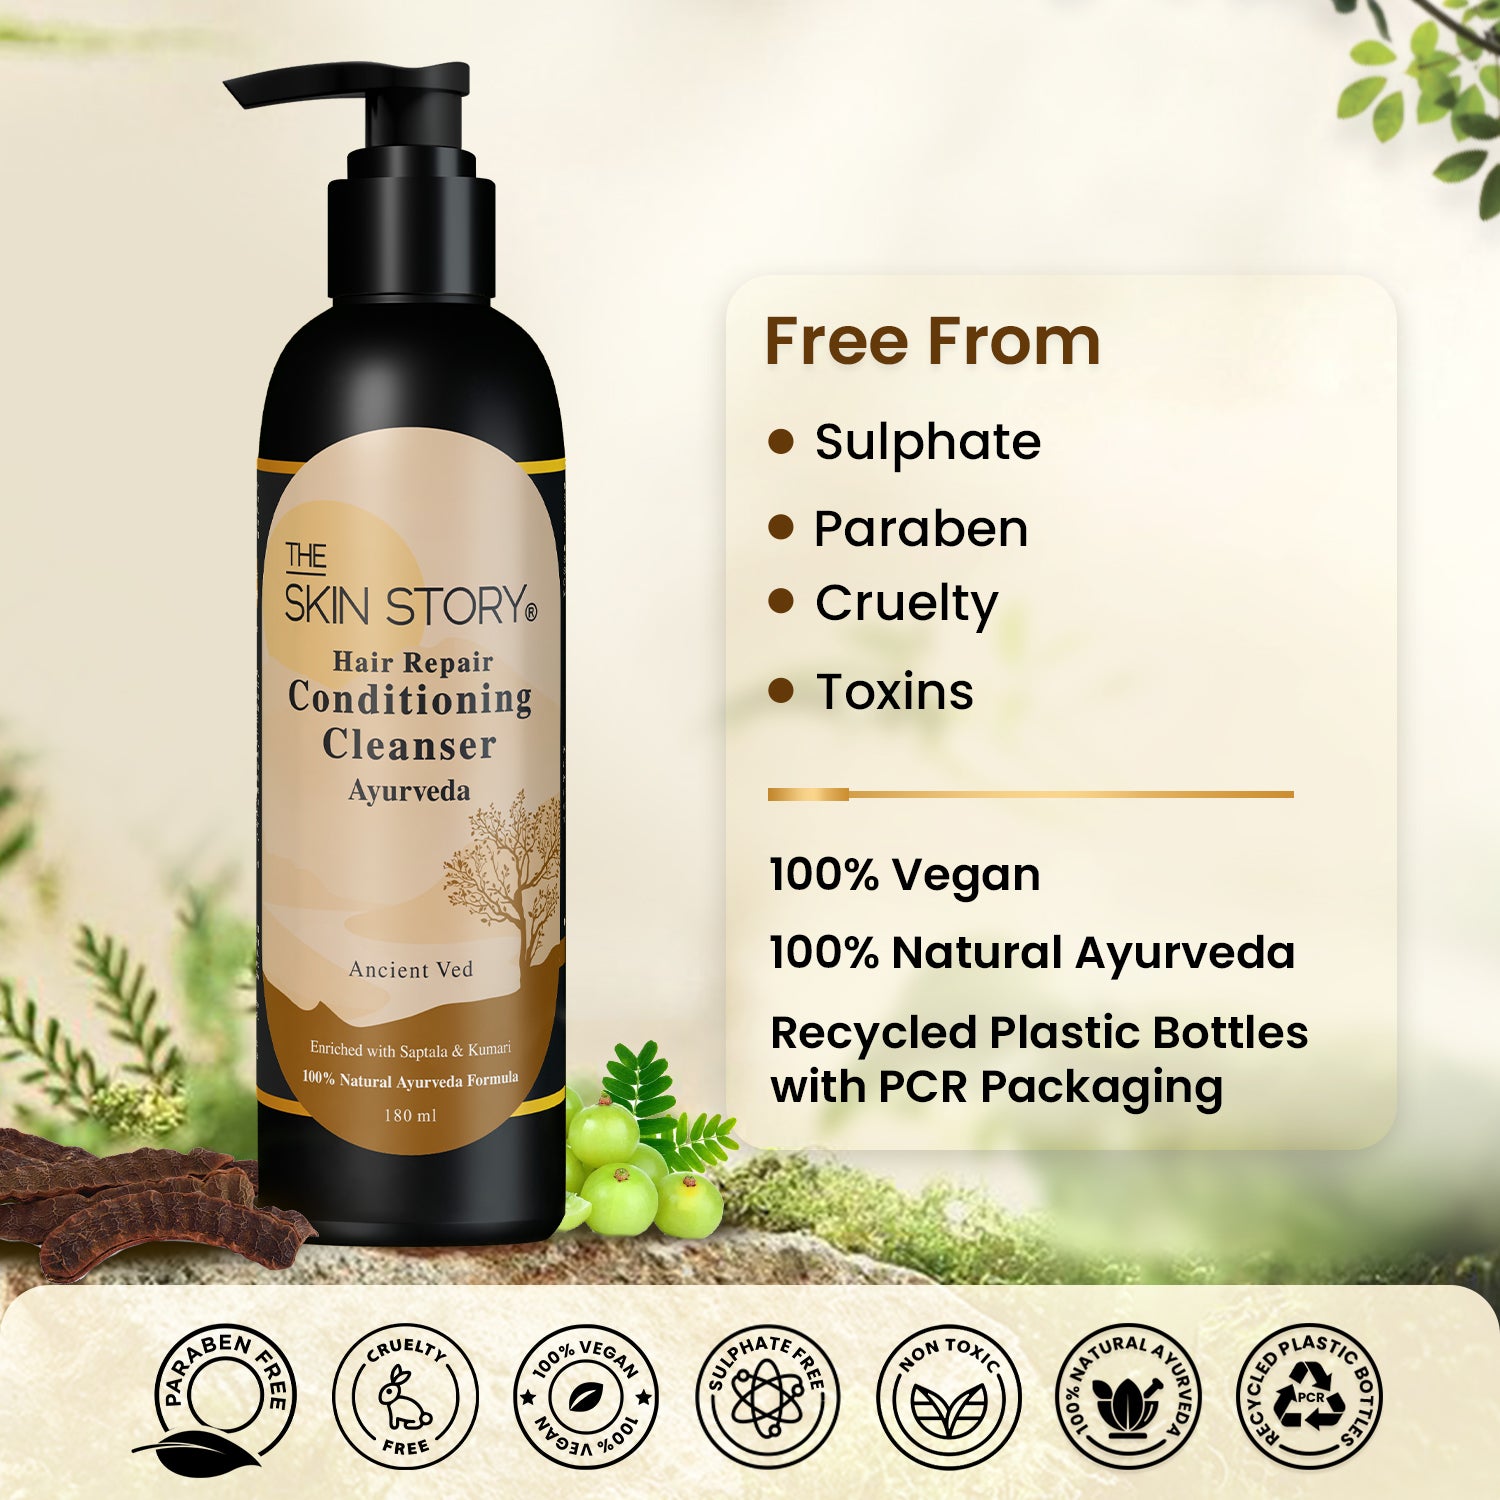 The Skin Story Ancient Ved Hair Repair Conditioner | Ayurvedic Hair Conditioner | Ayurvedic Conditioner for Soft and Silky Hair | 180 ml